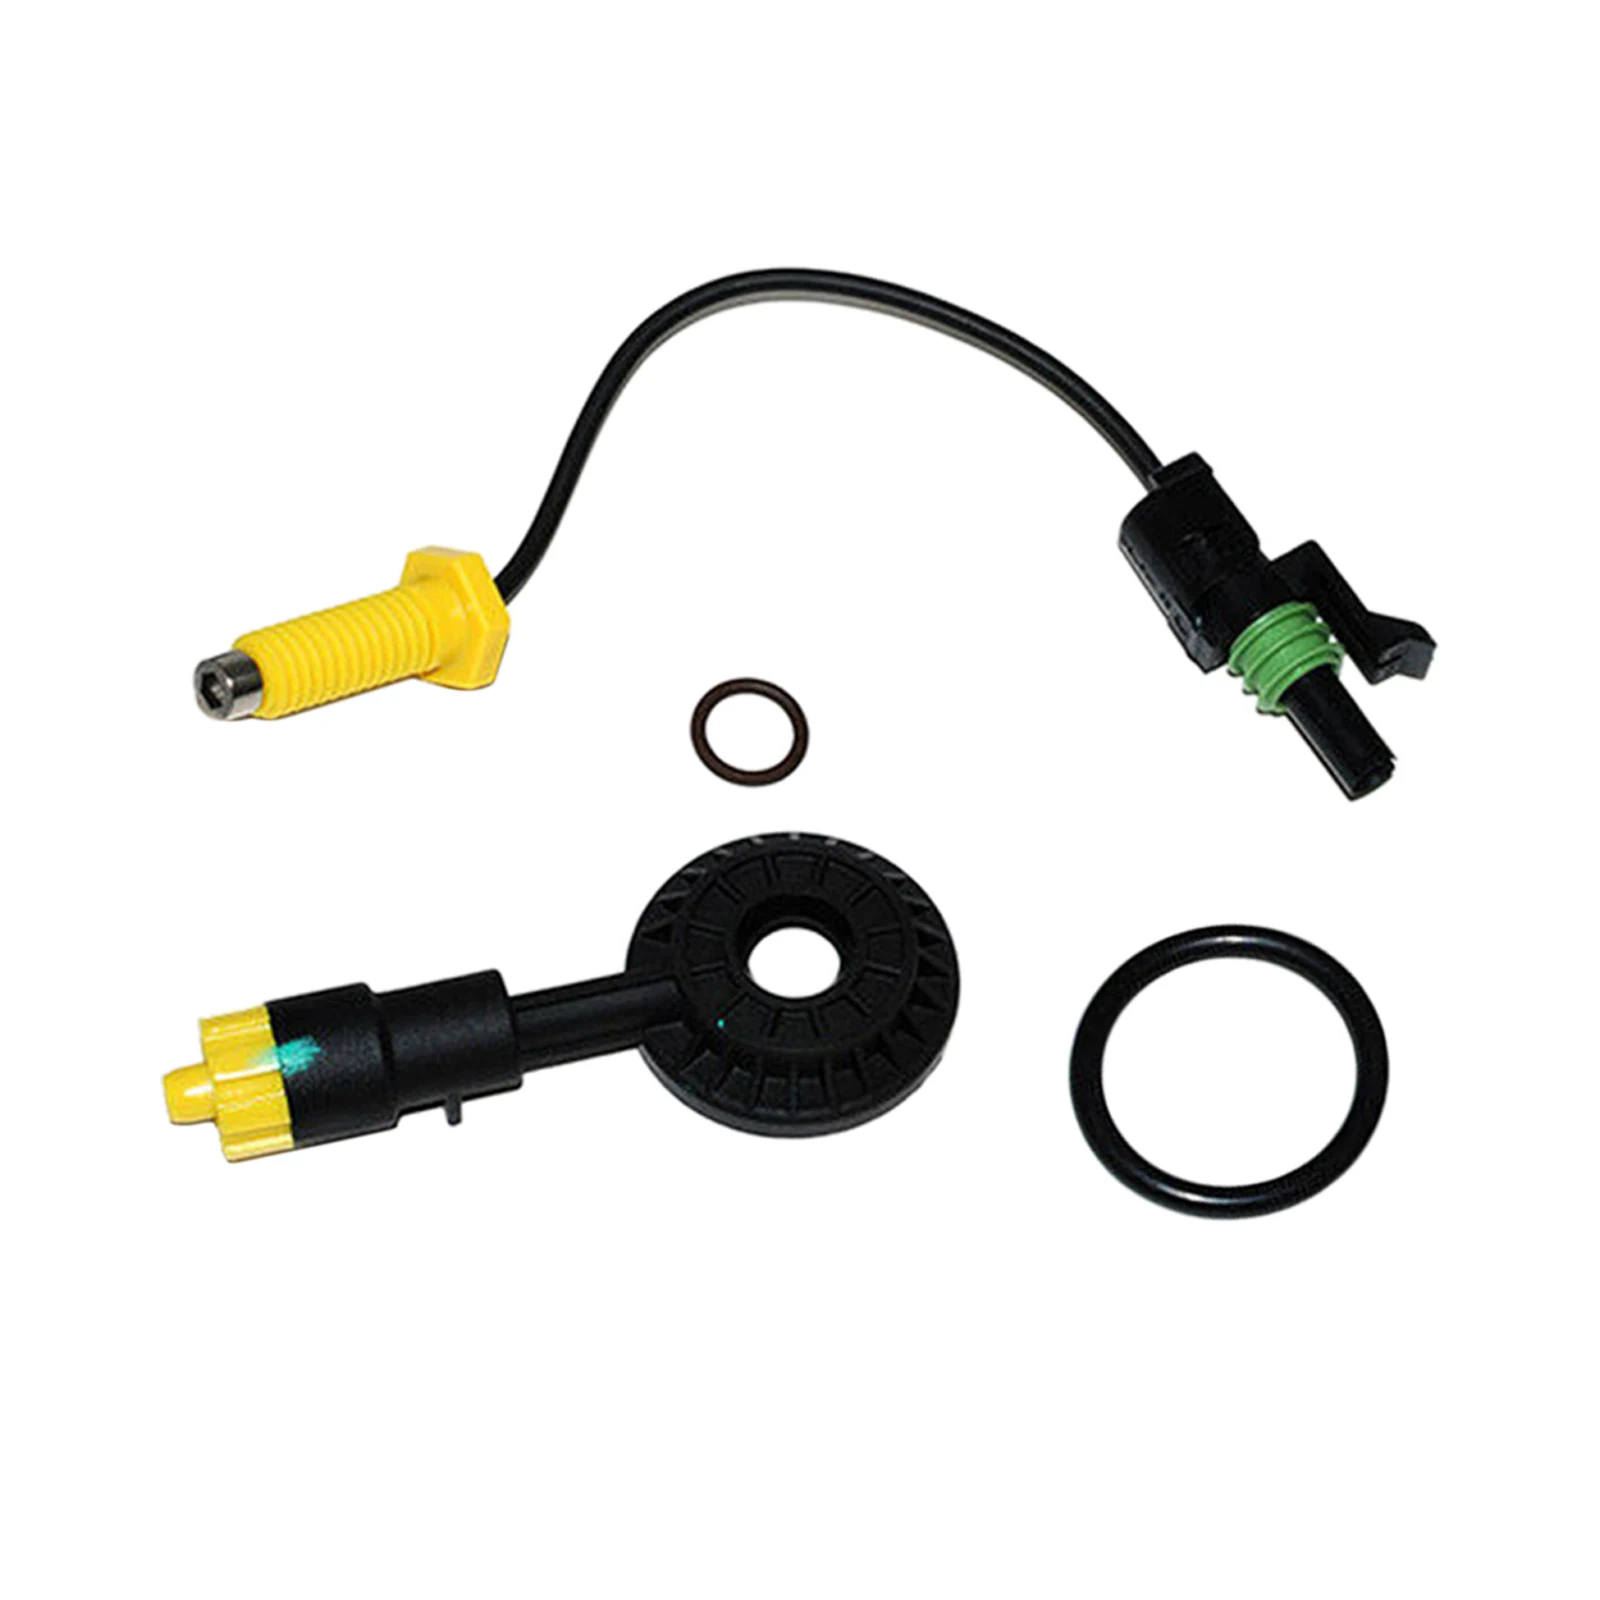 Black Diesel Fuel Water Sensor Fits for LAND ROVER DISCOVERY 3 All Model Years WKW500080LR